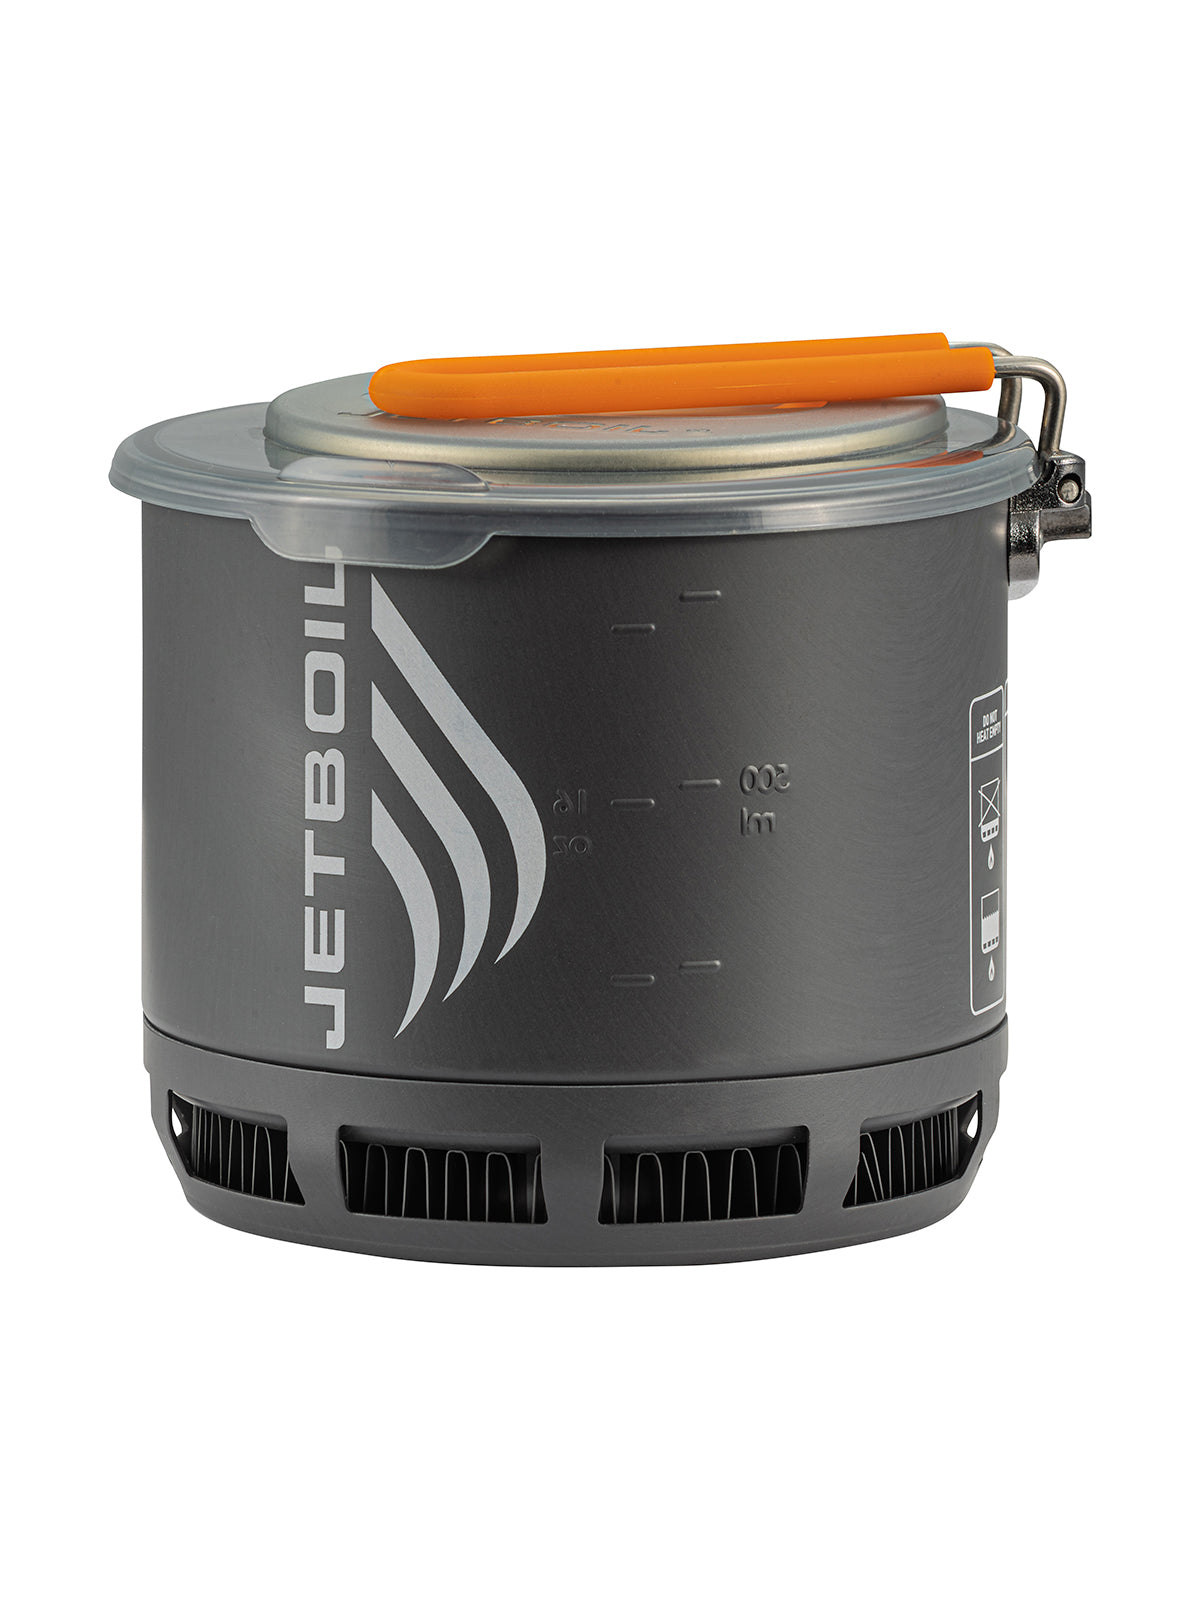 Jetboil STASH Cooking System packed